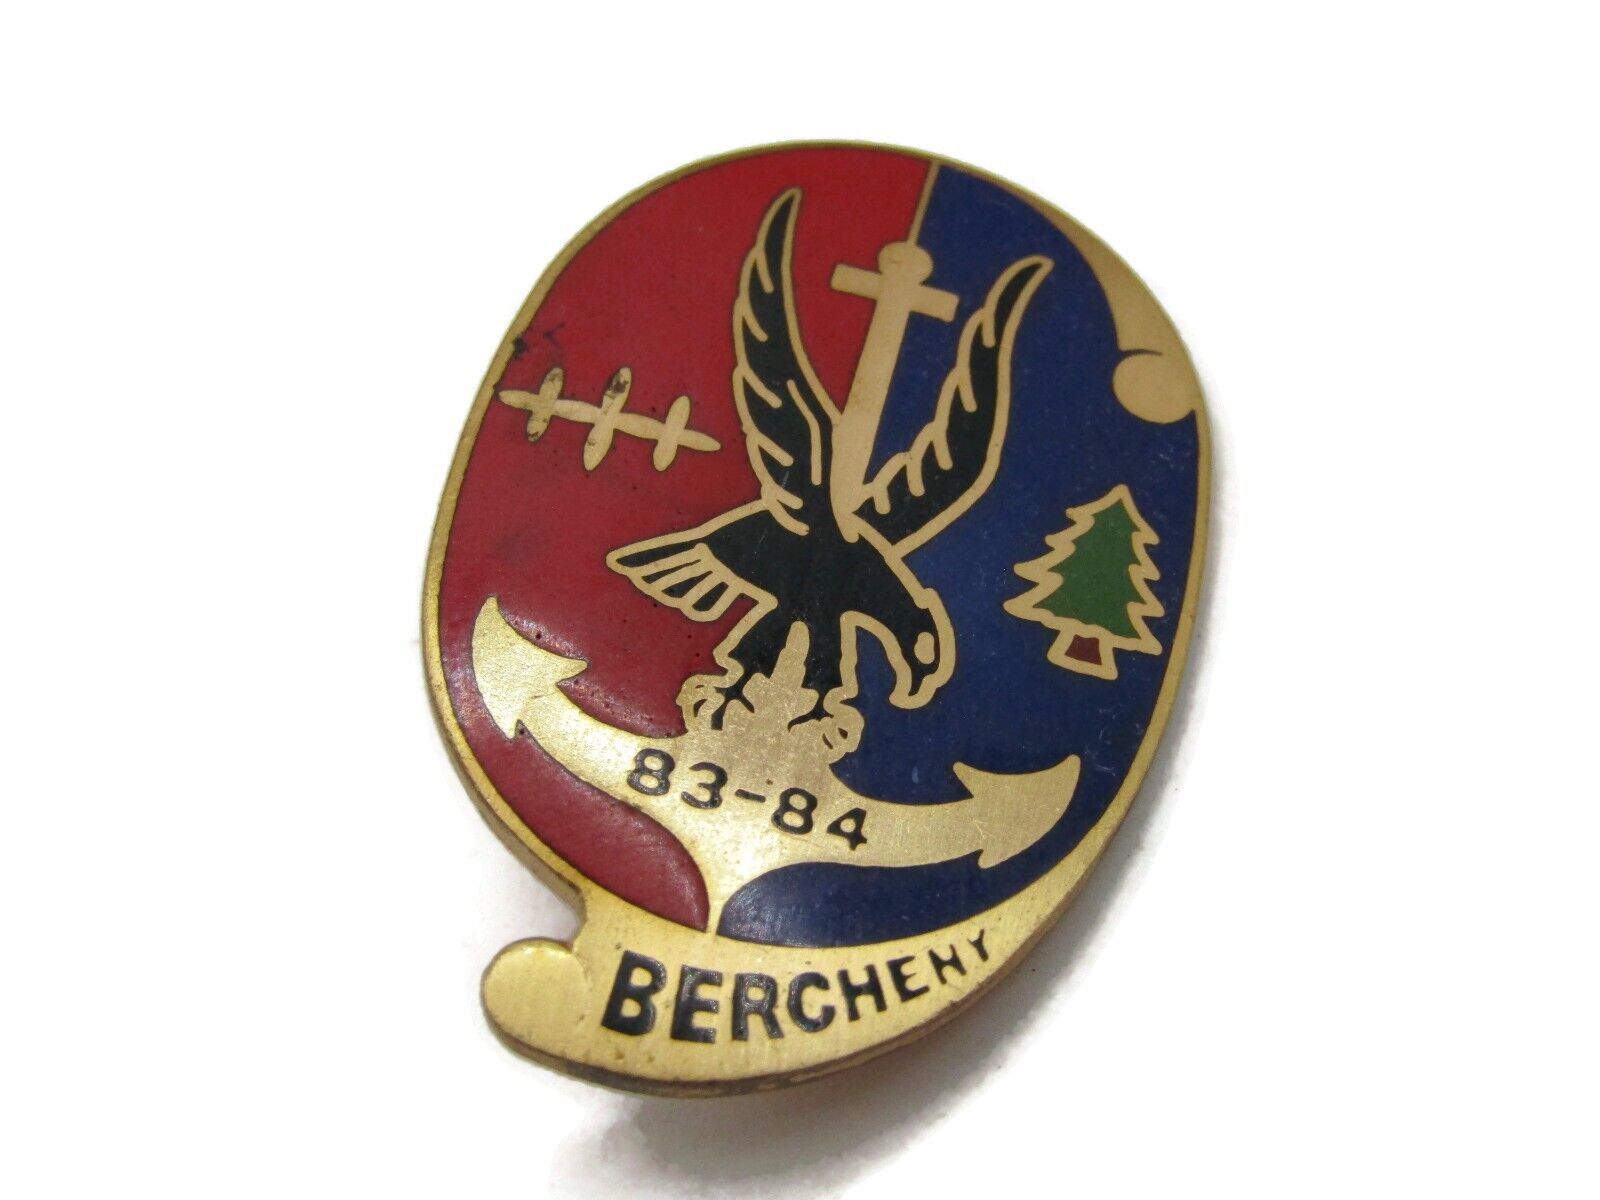 French Army Bercheny Pin Badge 83-84 Crest Design